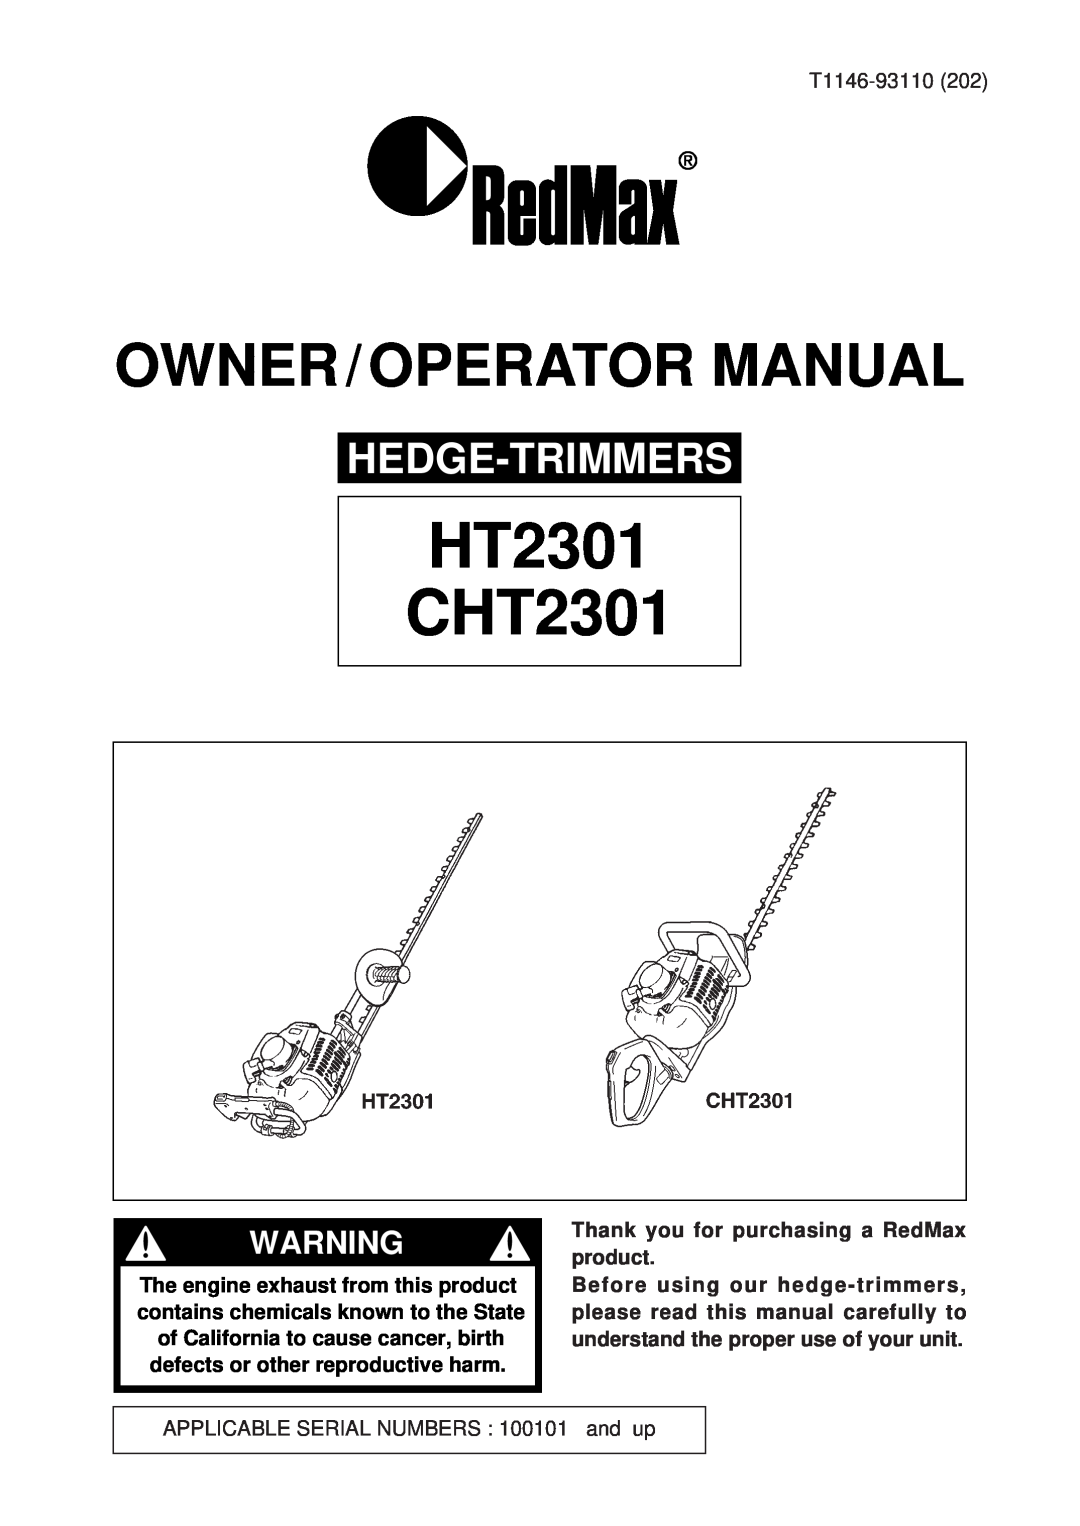 Zenoah CHT2301, HT2301 manual HT2301 CHT2301, Hedge-Trimmers, Owner / Operator Manual 